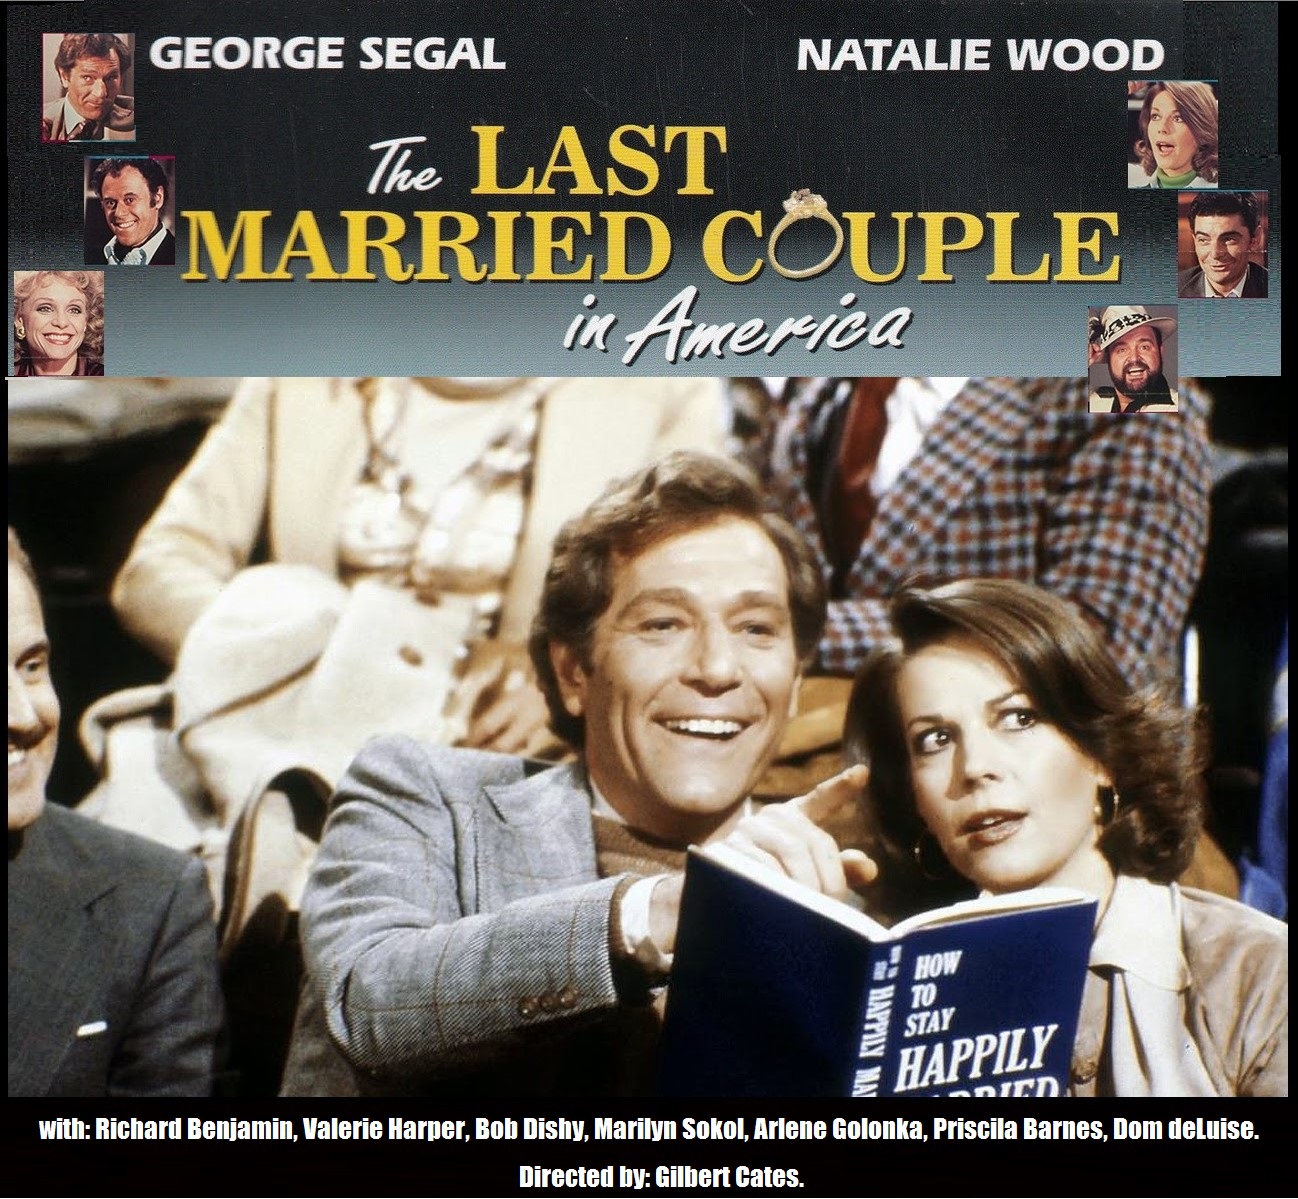 THE LAST MARRIED COUPLE IN AMÉRICA (1980) WEB SITE